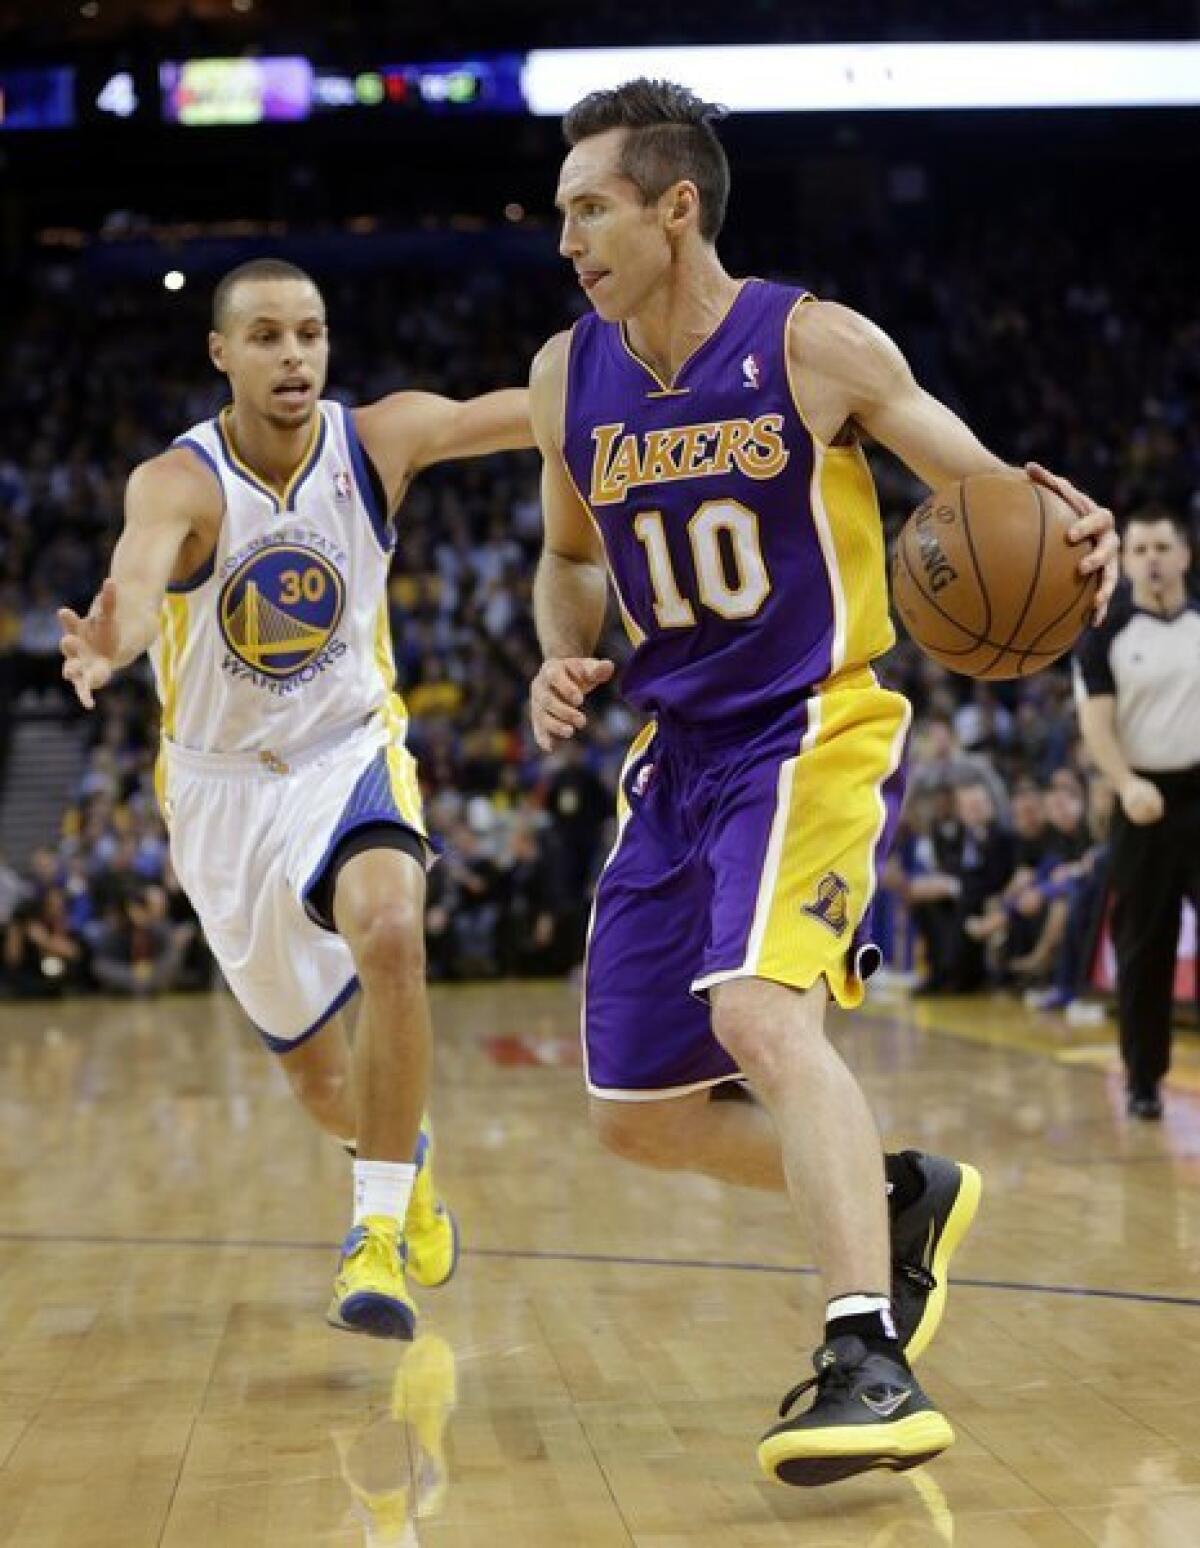 Steve Nash had 12 points and nine assists against Golden State in his first game back from a leg injury.